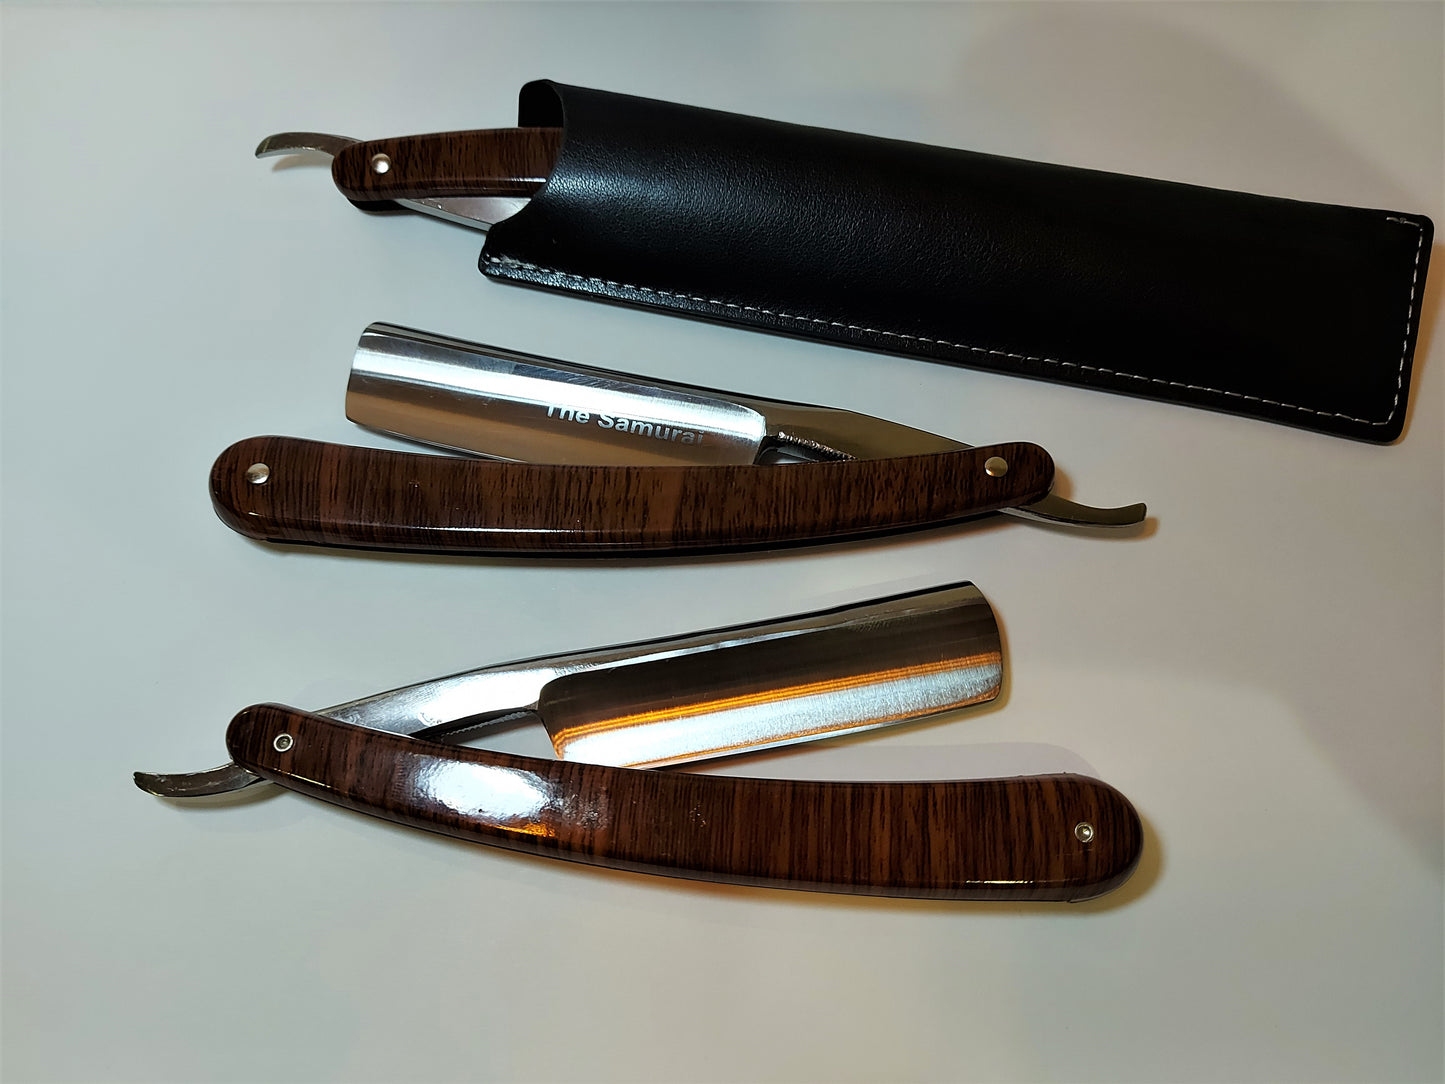 Straight Razor, Honed in USA & Ready-to-Use (Comes w/ Leather Sheath)